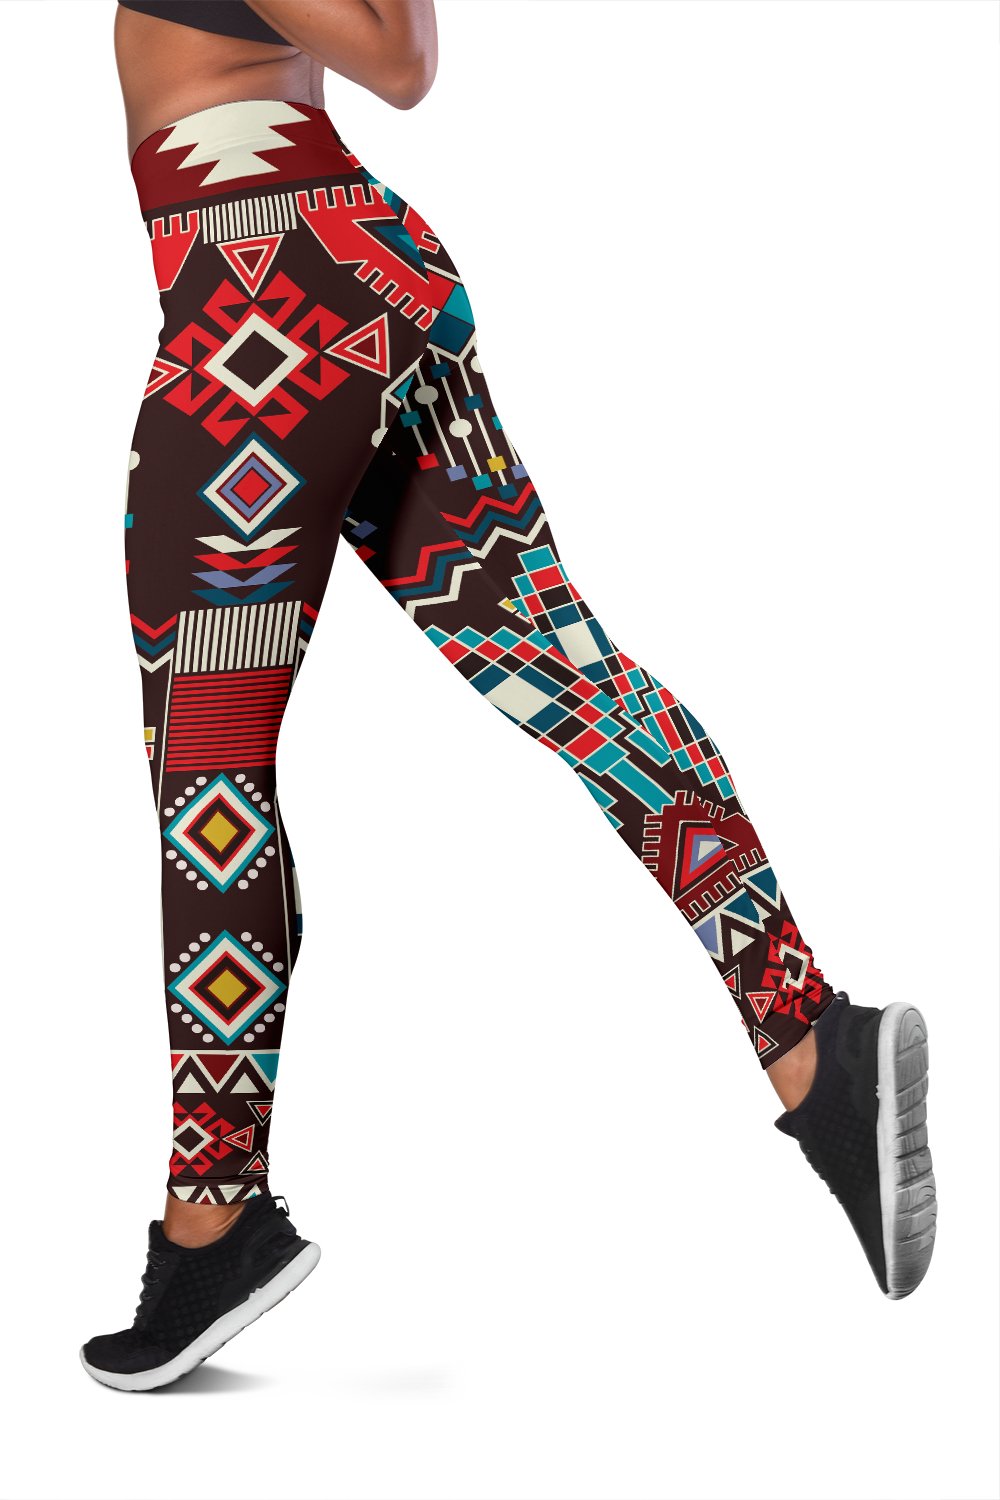 Tribal Print Plus Size Leggings for Women High Waist Womens Workout Yoga  Pants Brown at  Women's Clothing store